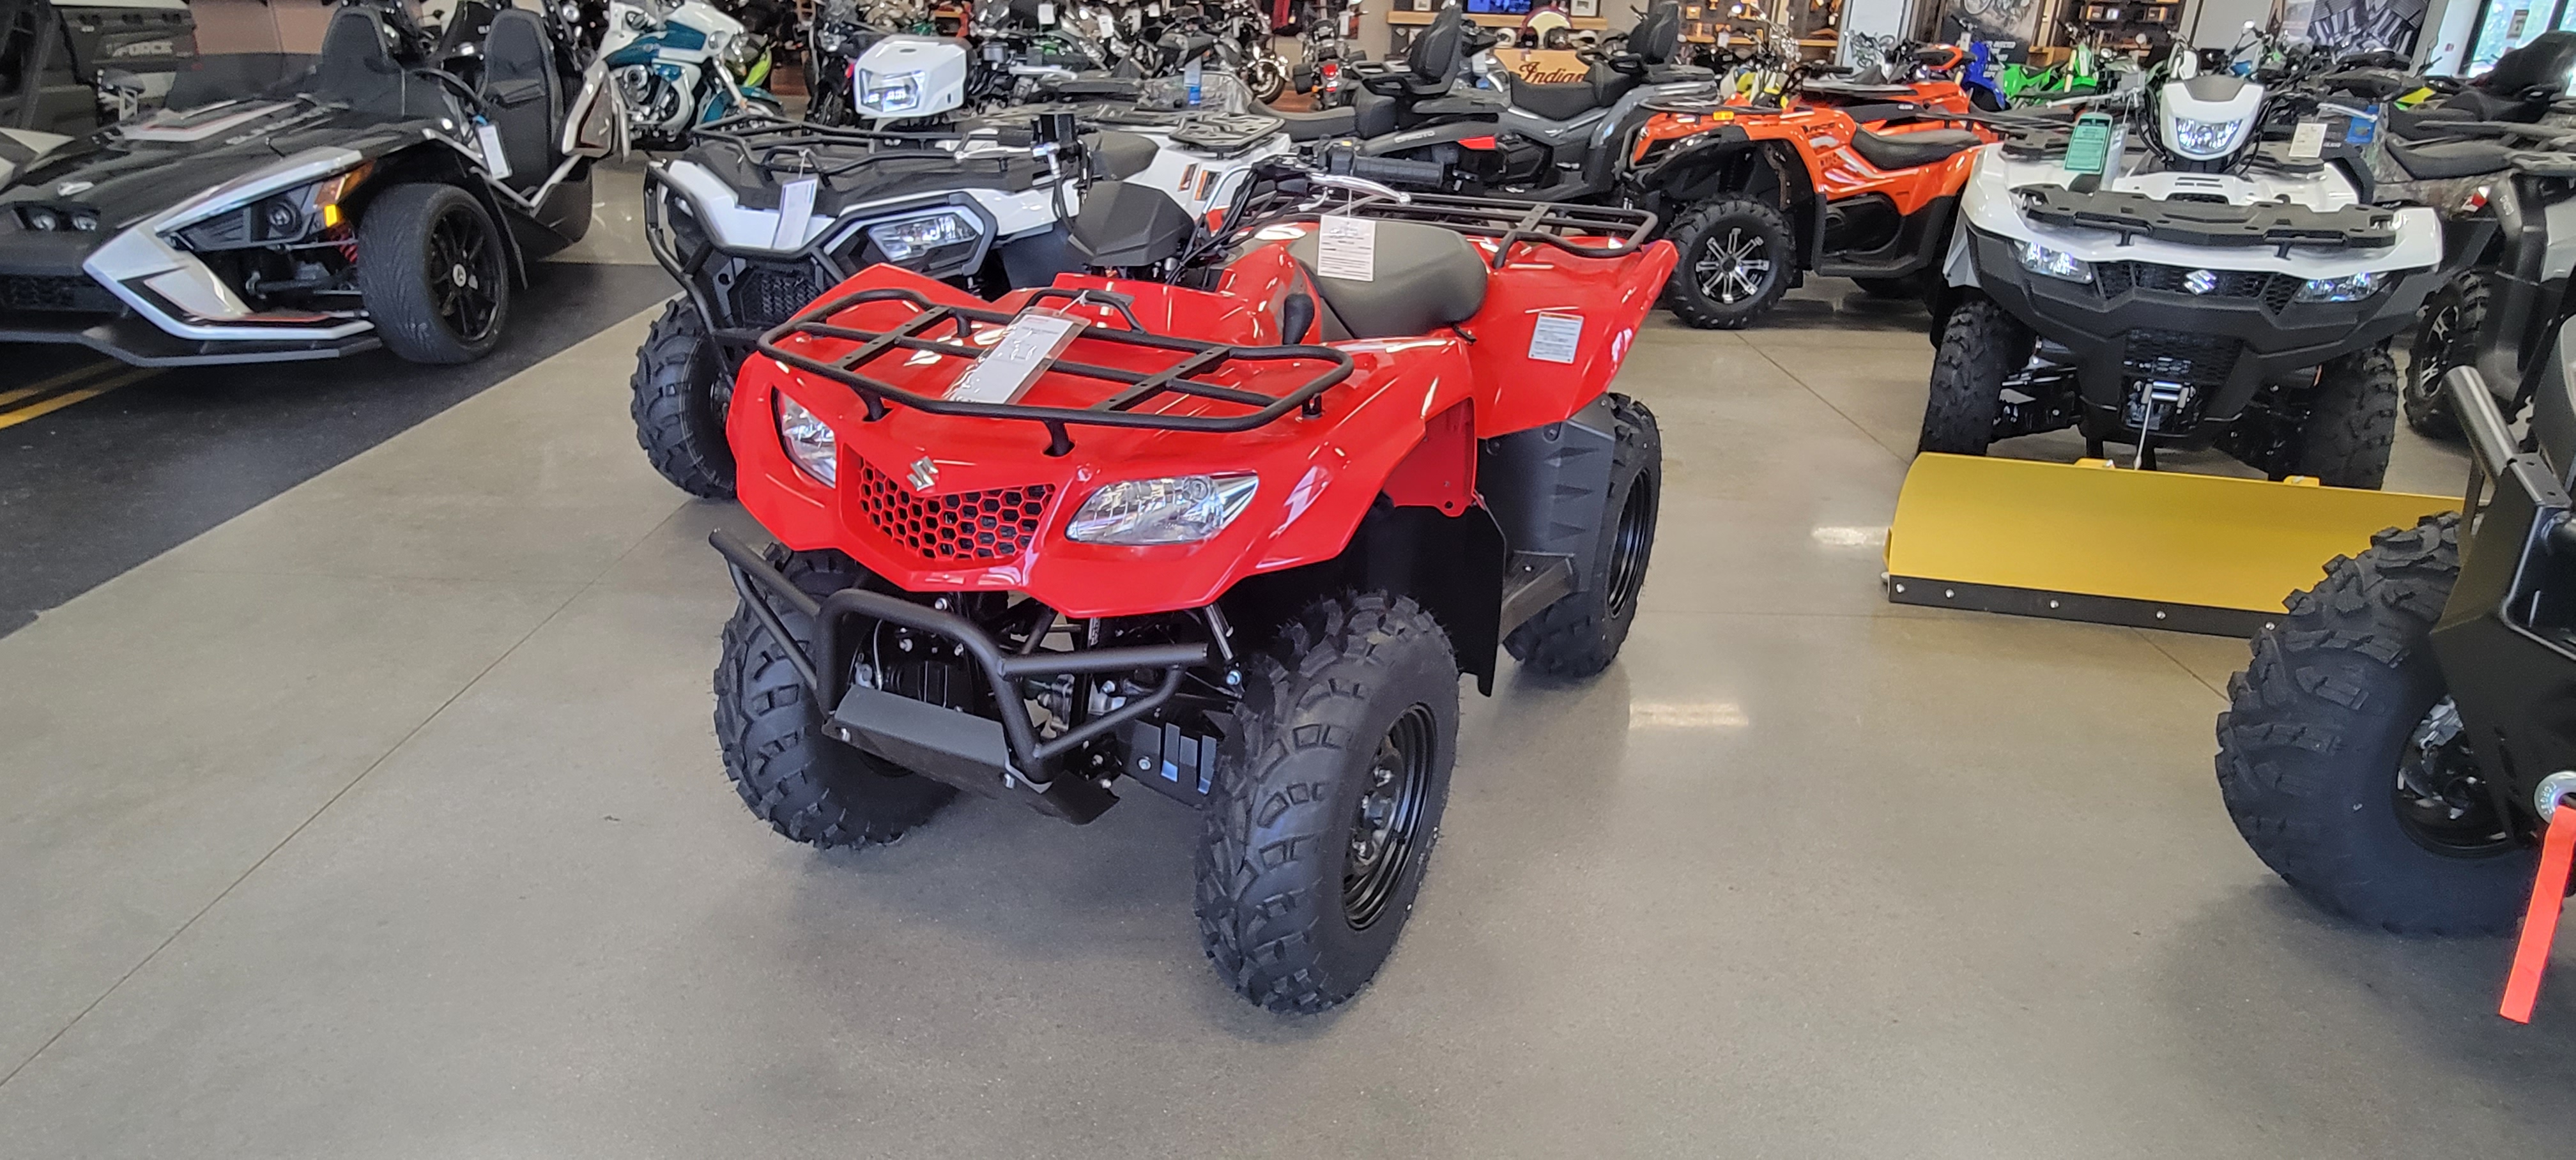 2022 Suzuki KingQuad 400 ASi at Brenny's Motorcycle Clinic, Bettendorf, IA 52722